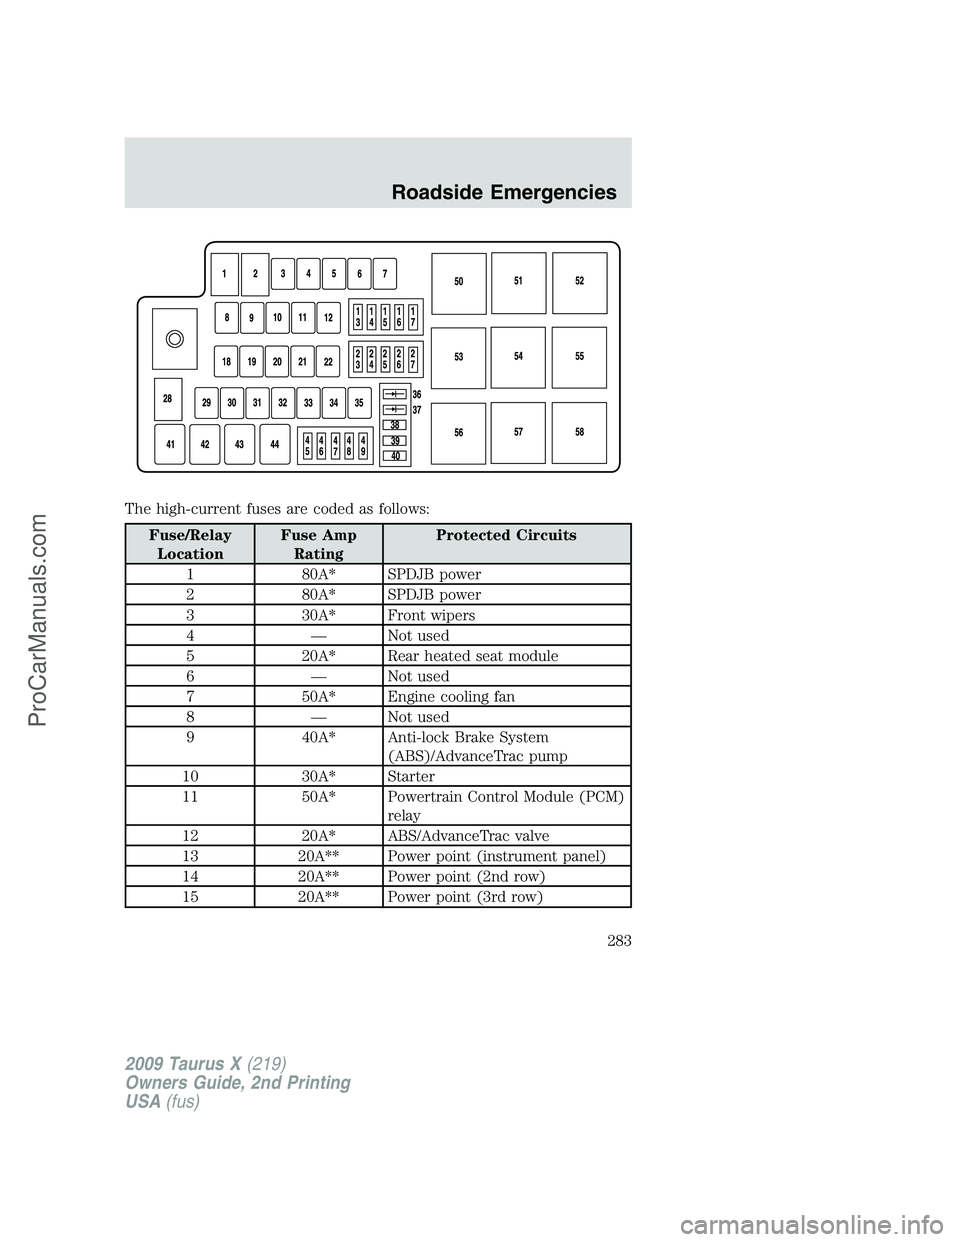 FORD FREESTYLE 2009  Owners Manual The high-current fuses are coded as follows:
Fuse/Relay
LocationFuse Amp
RatingProtected Circuits
1 80A* SPDJB power
2 80A* SPDJB power
3 30A* Front wipers
4 — Not used
5 20A* Rear heated seat modul